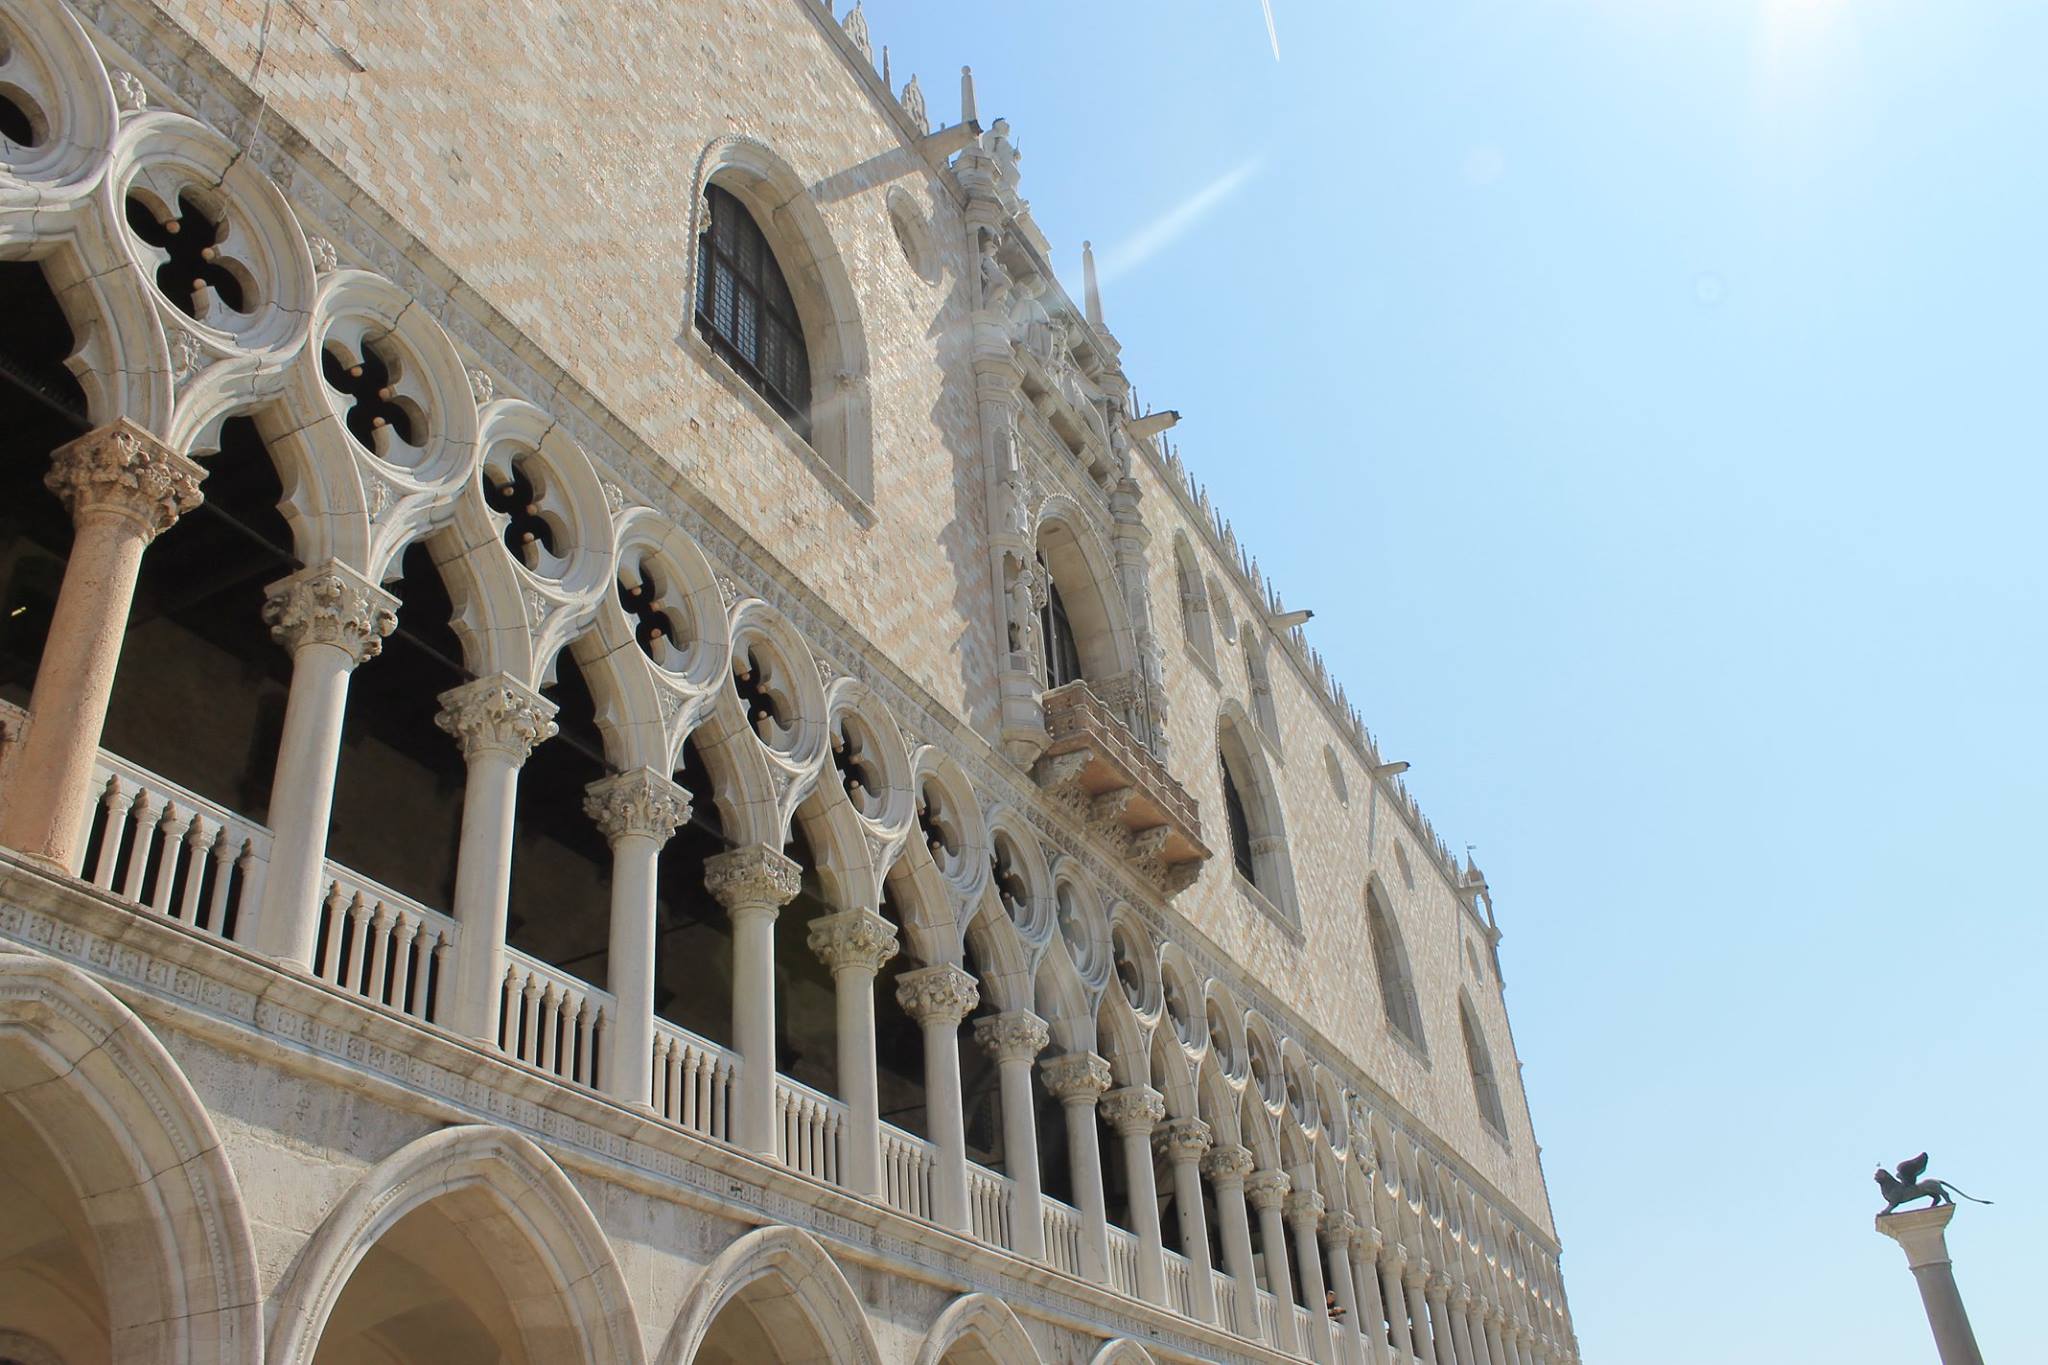 The Essence of Venice: San Marco Squale and the Doge Palace